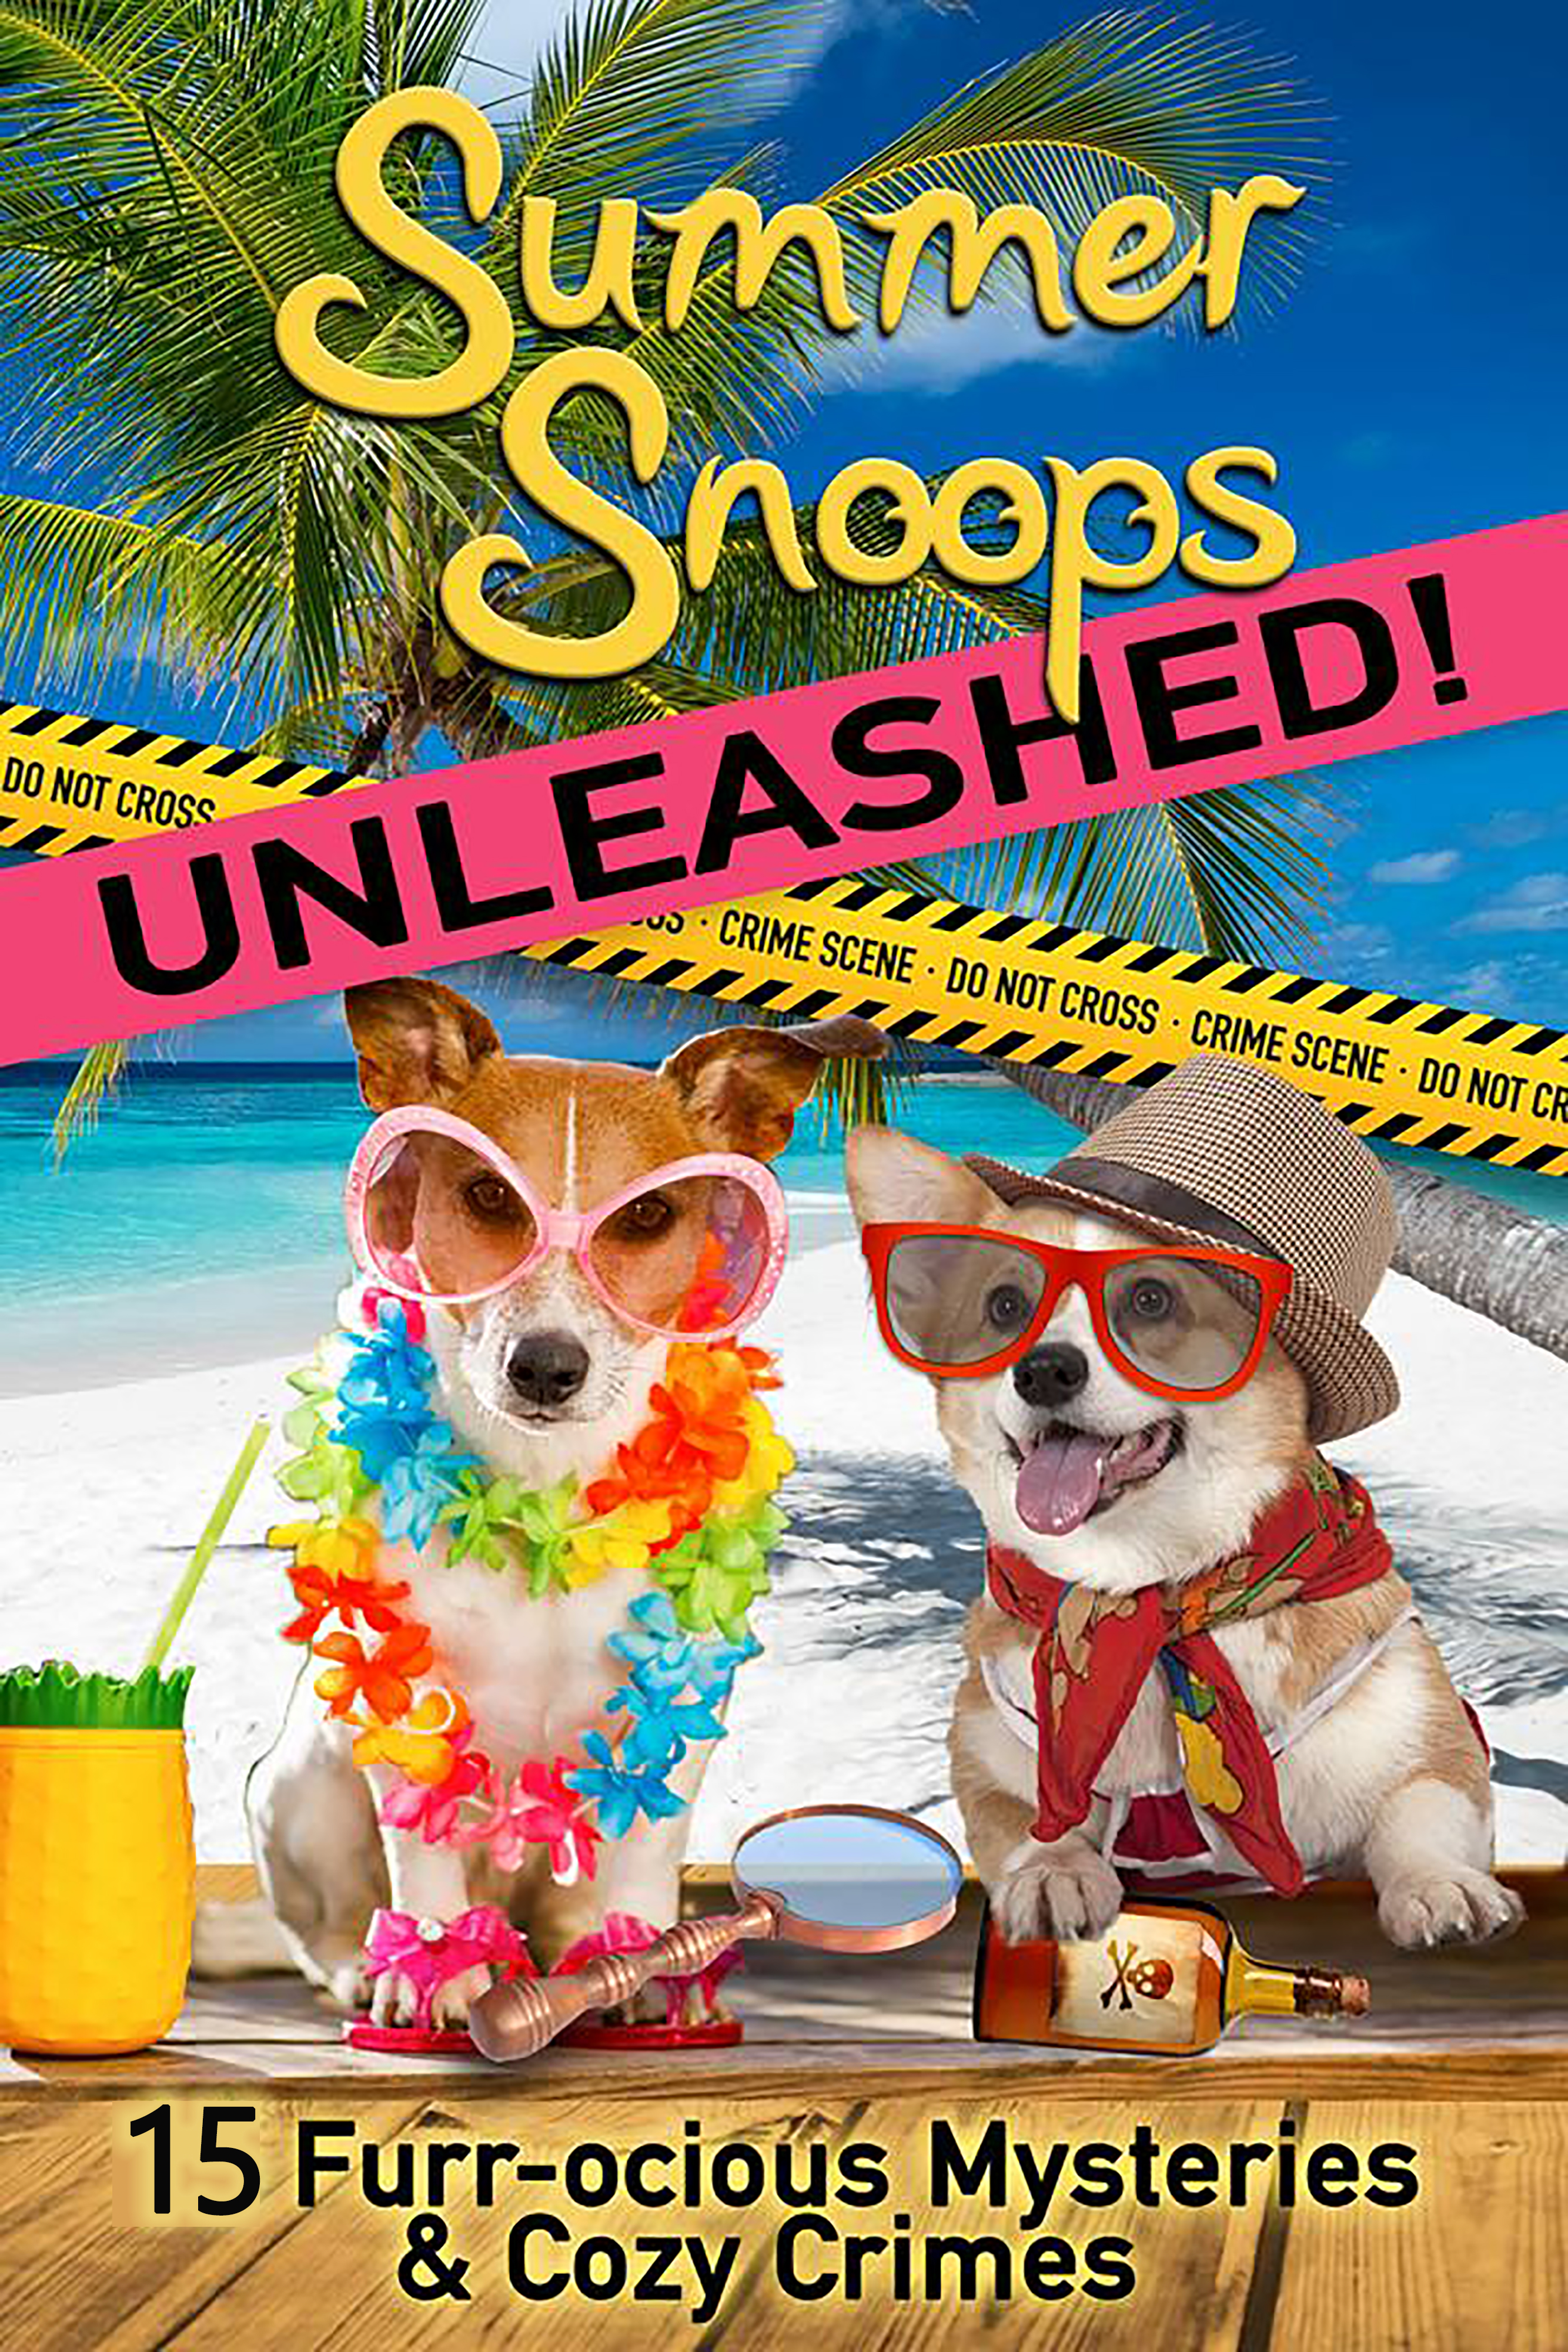 Summer Snoops Unleashed